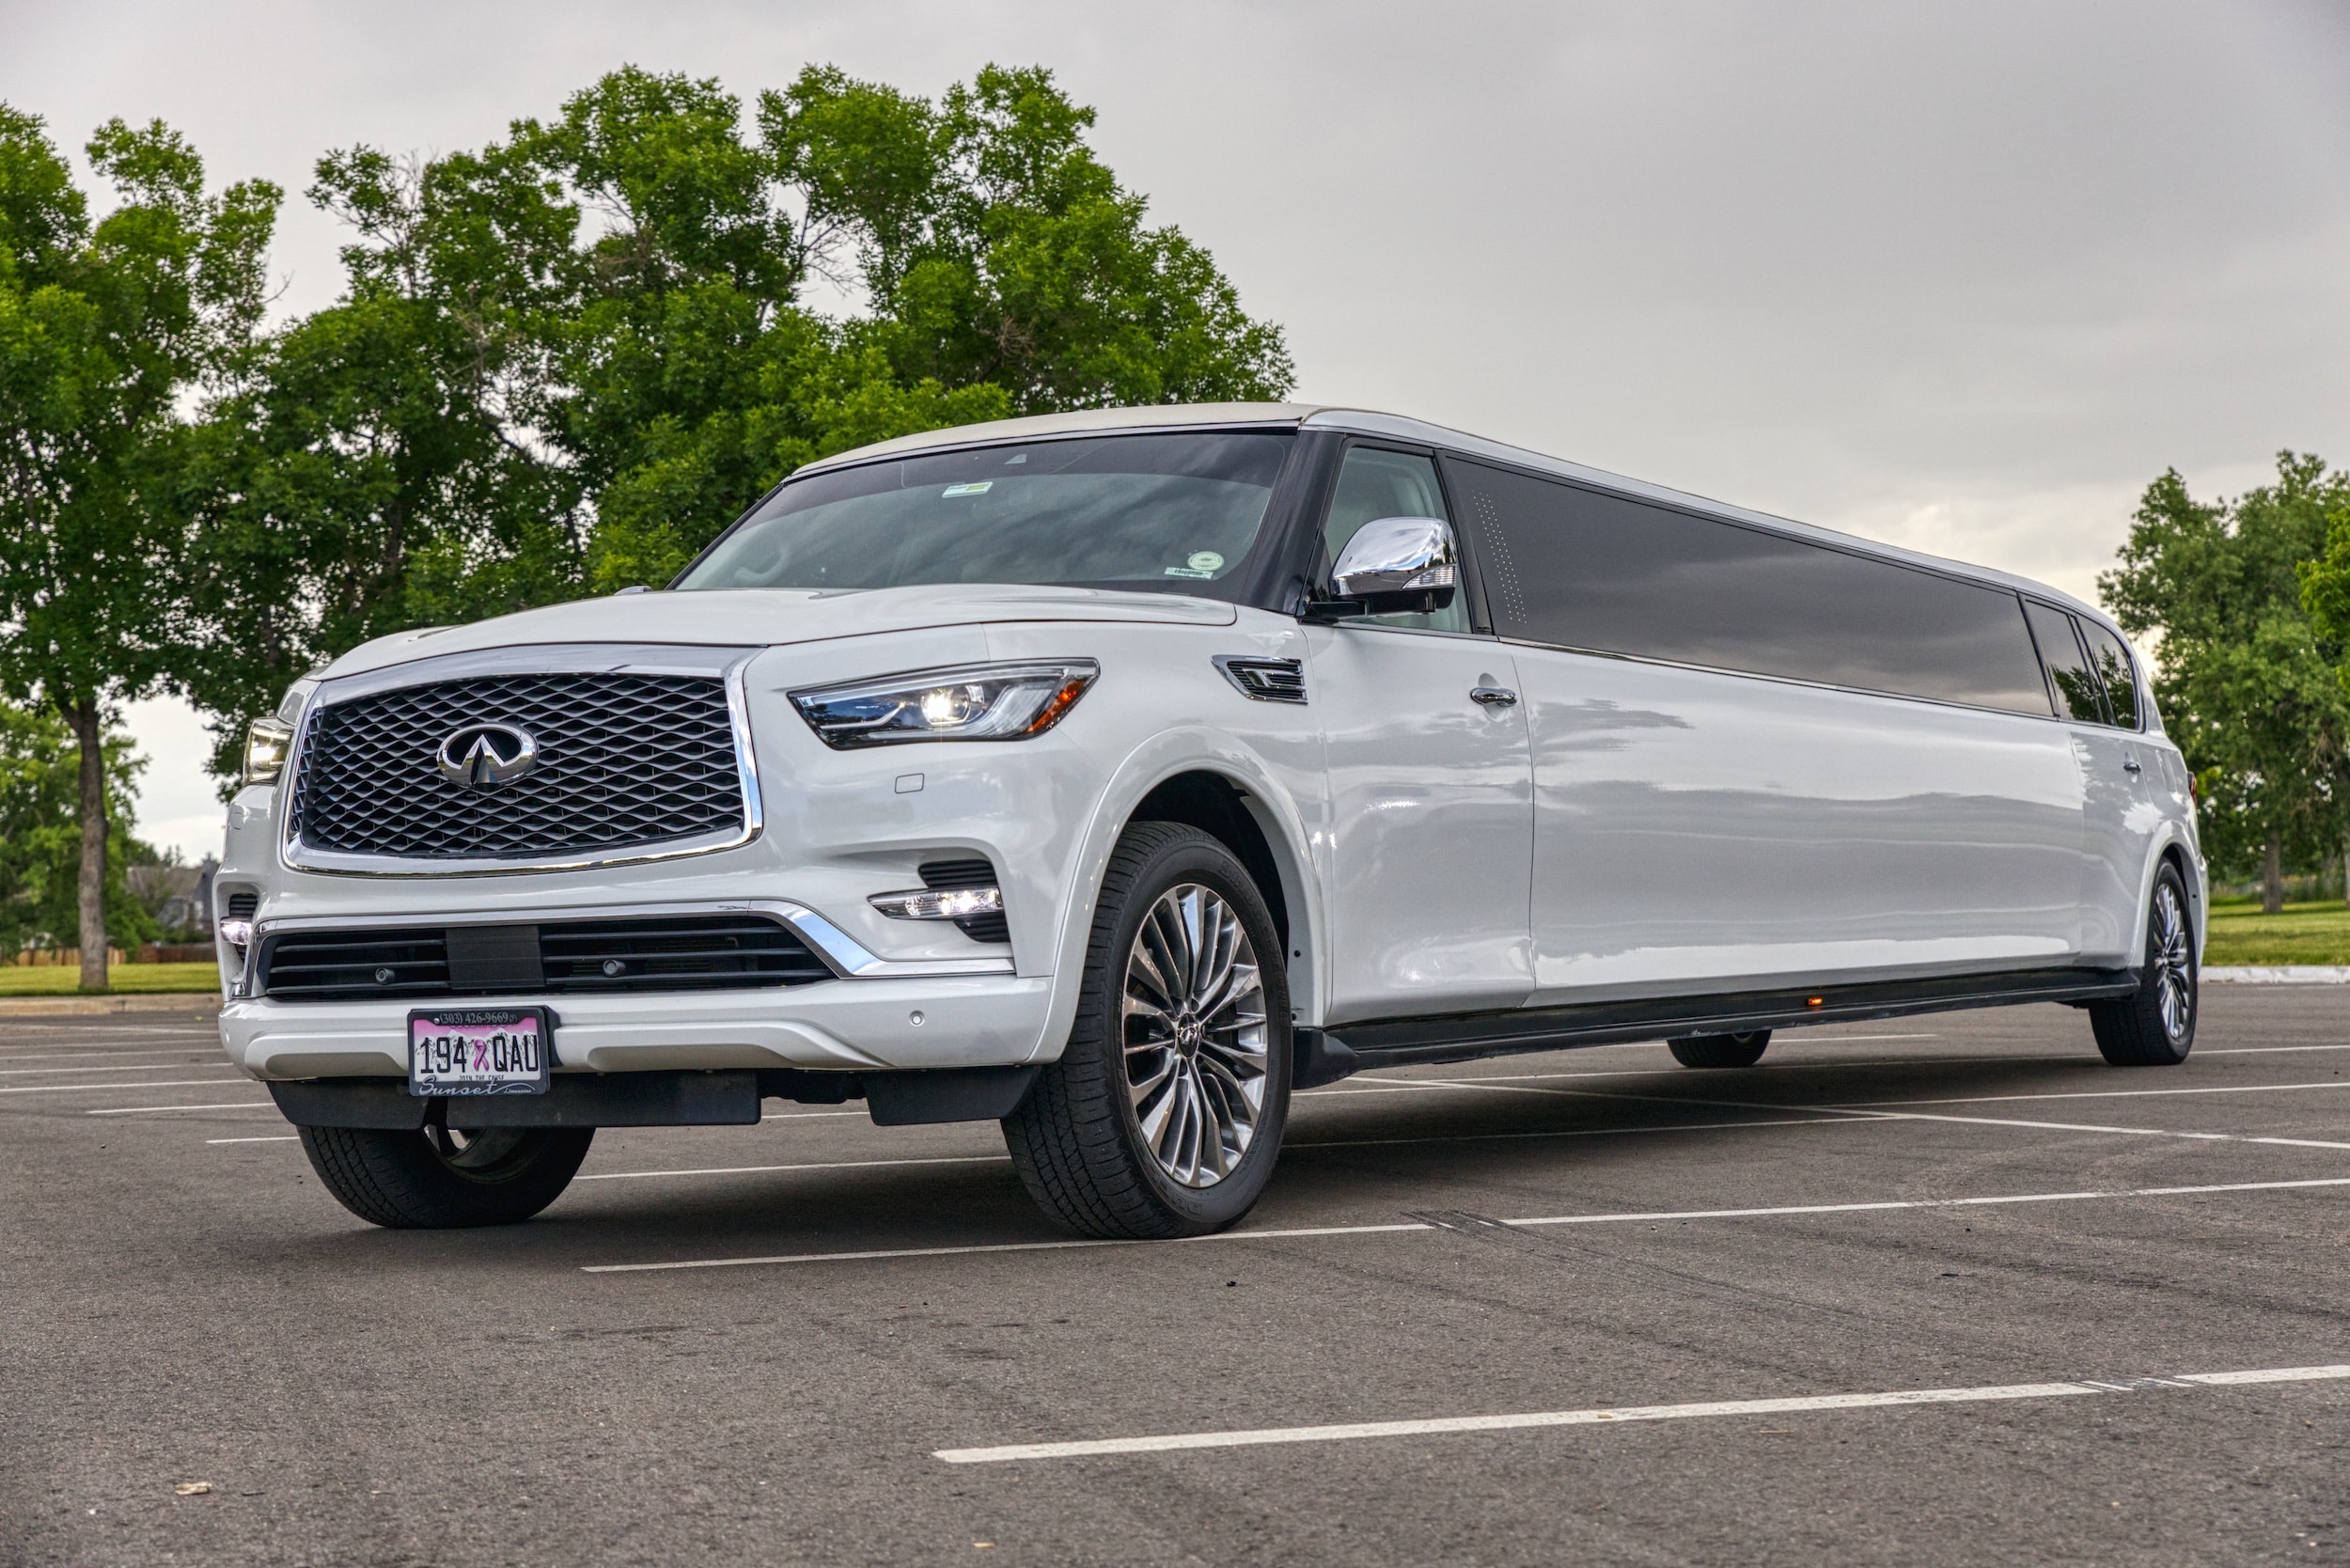 A white Infiniti Qx80 with a gull-wing door open